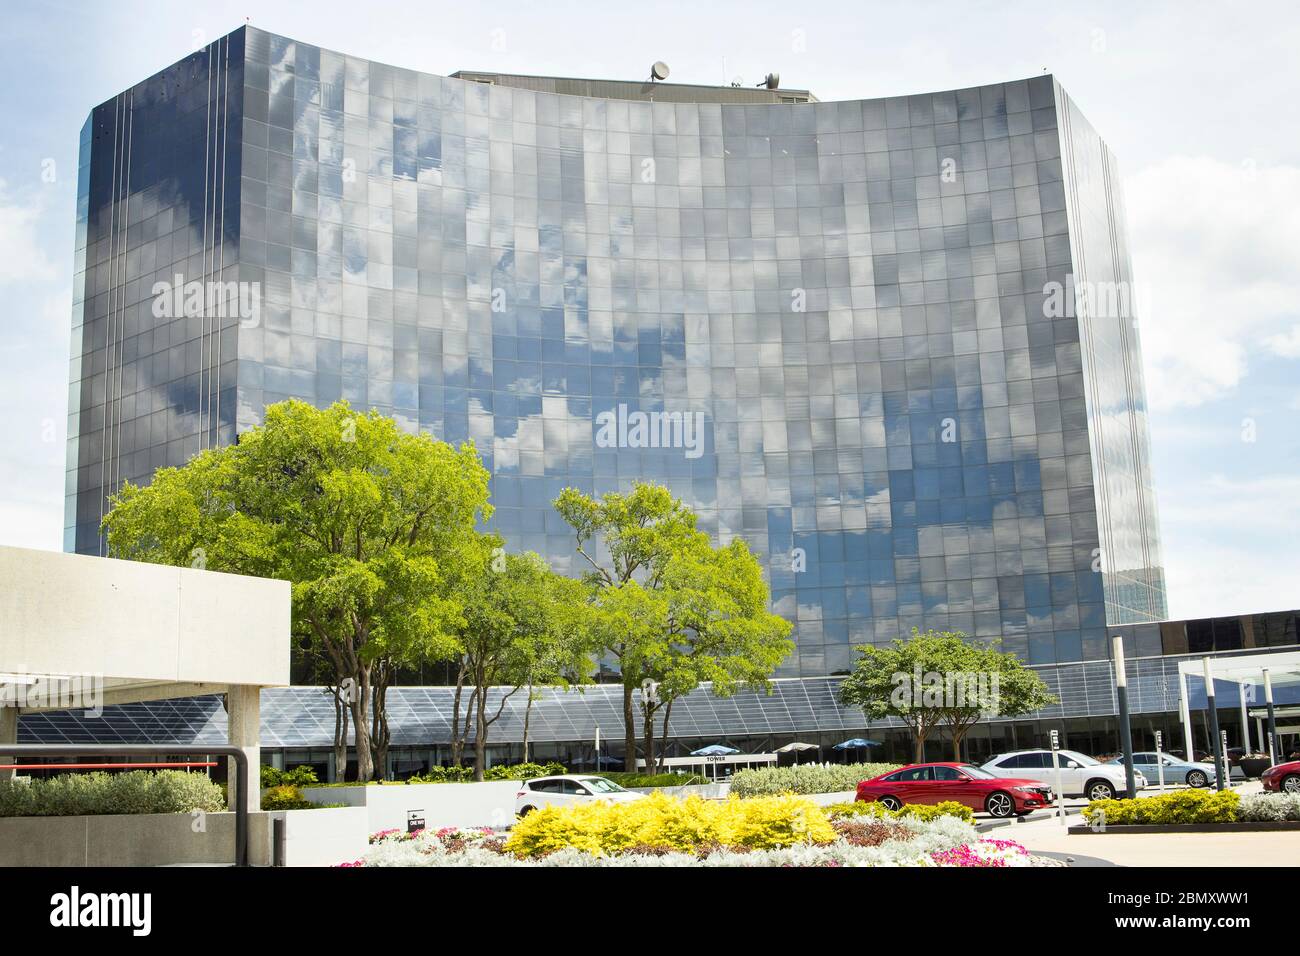 Curved front facade and parking lot with flowers show off this modern mirrored office building in Dallas, Texas Stock Photo